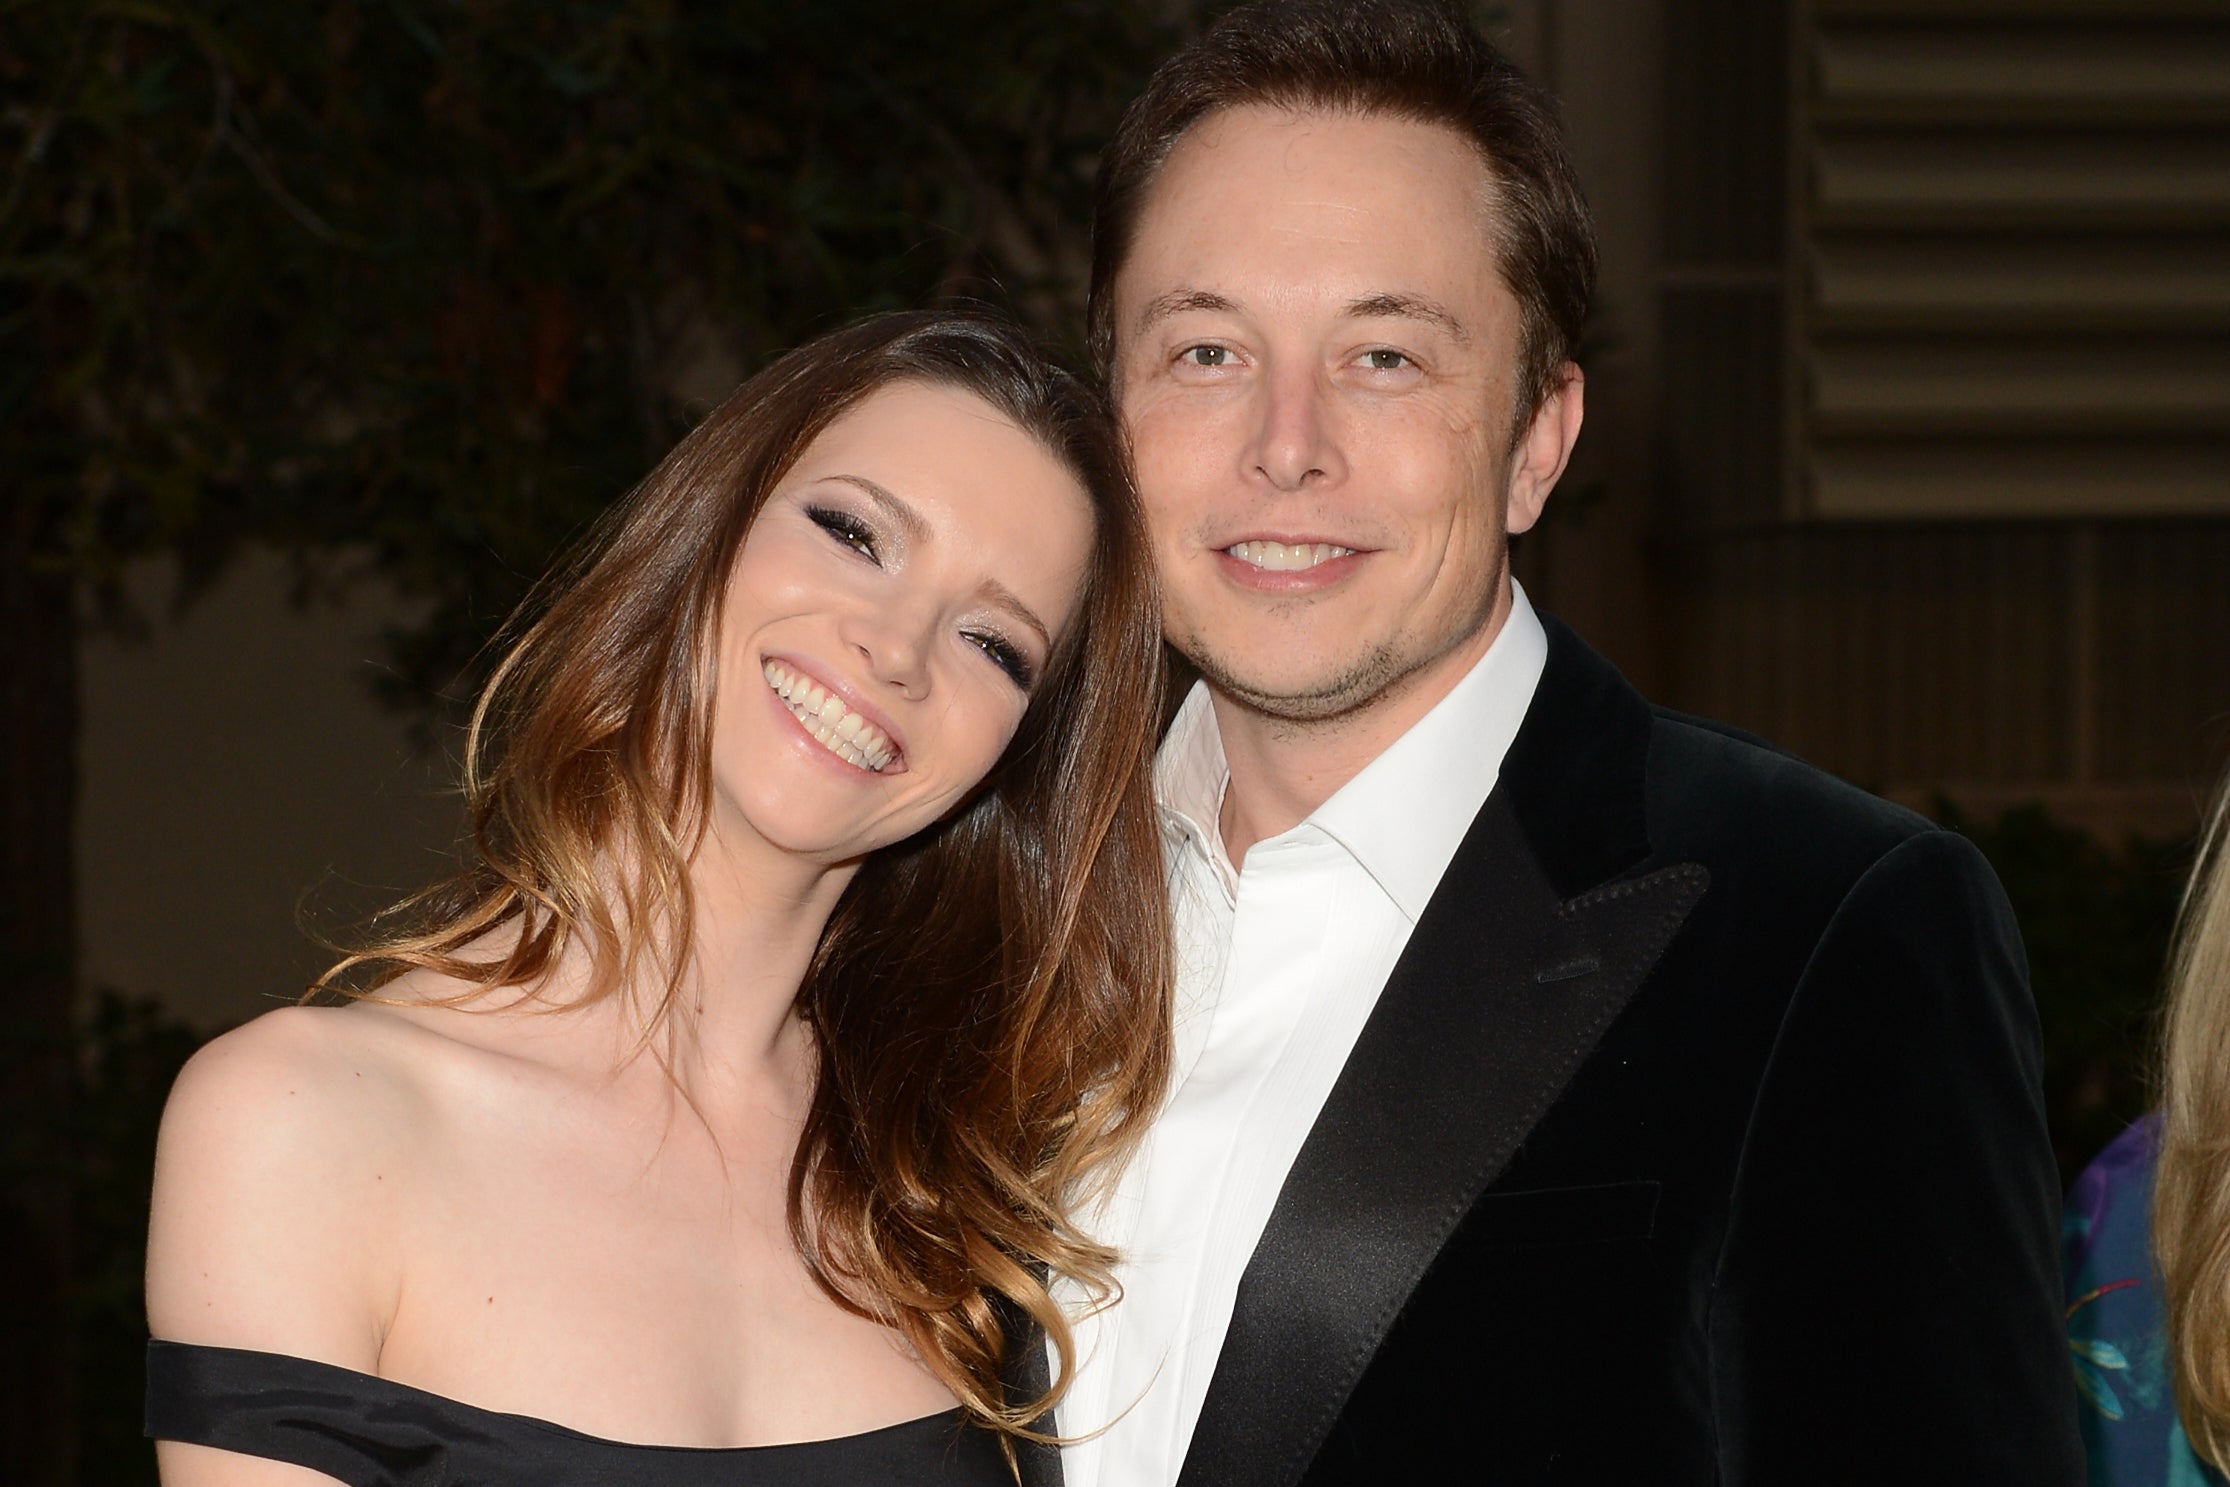 Riley and Musk photographed in 2012, the year of their first marriage.